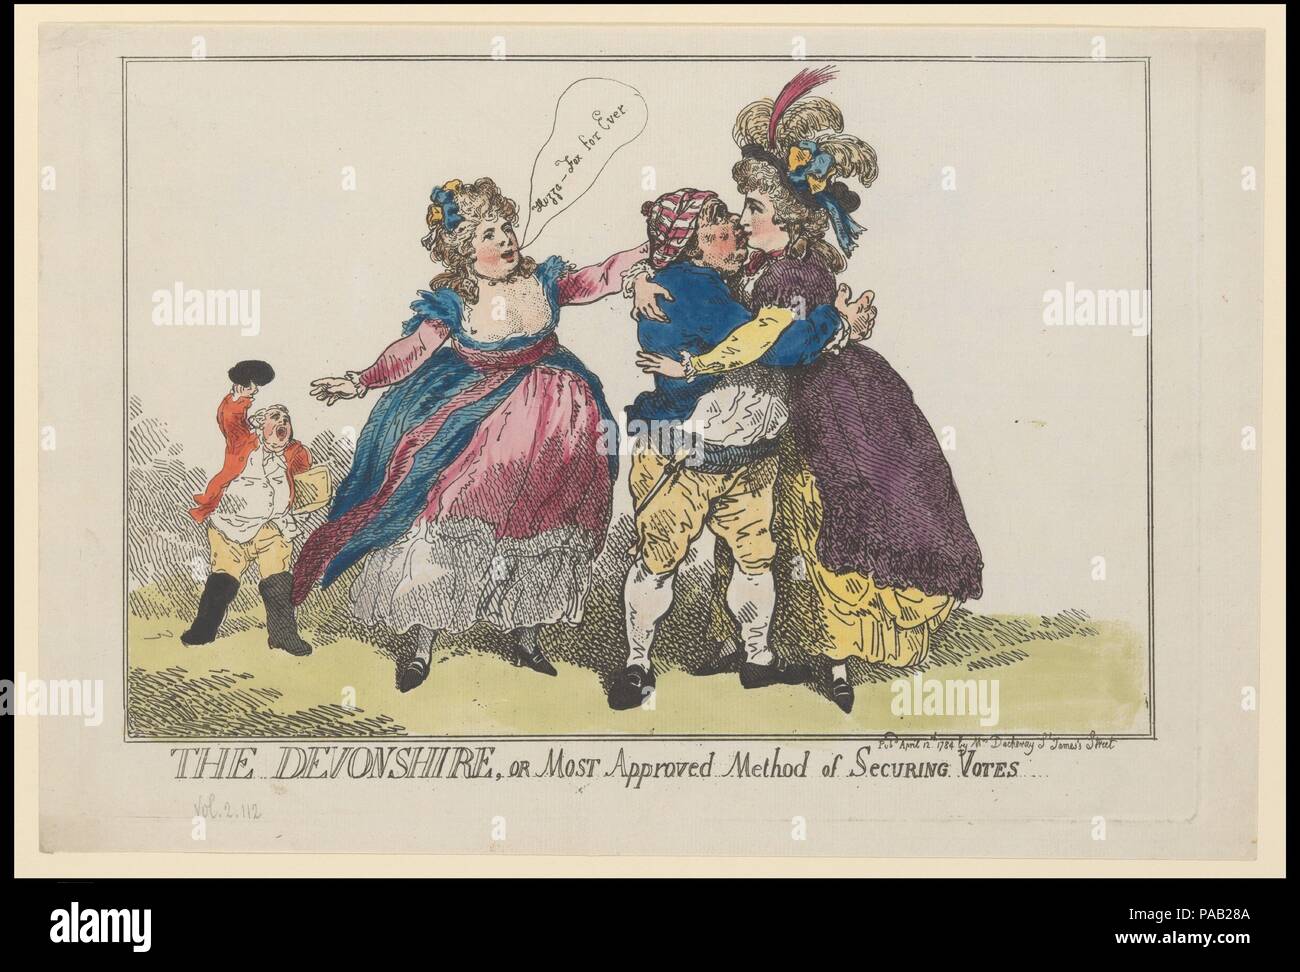 The Devonshire, or Most Approved Method of Securing Votes. Artist: Thomas Rowlandson (British, London 1757-1827 London). Dimensions: Sheet: 10 3/8 × 15 1/8 in. (26.3 × 38.4 cm)  Plate: 9 9/16 × 13 13/16 in. (24.3 × 35.1 cm). Published in: London. Publisher: Elizabeth Darchery (British, active 1780-84). Subject: Georgiana Cavendish, Duchess of Devonshire (British, Wimbledon, Surrey 1757-1806 Devonshire). Date: April 12, 1784. Museum: Metropolitan Museum of Art, New York, USA. Stock Photo